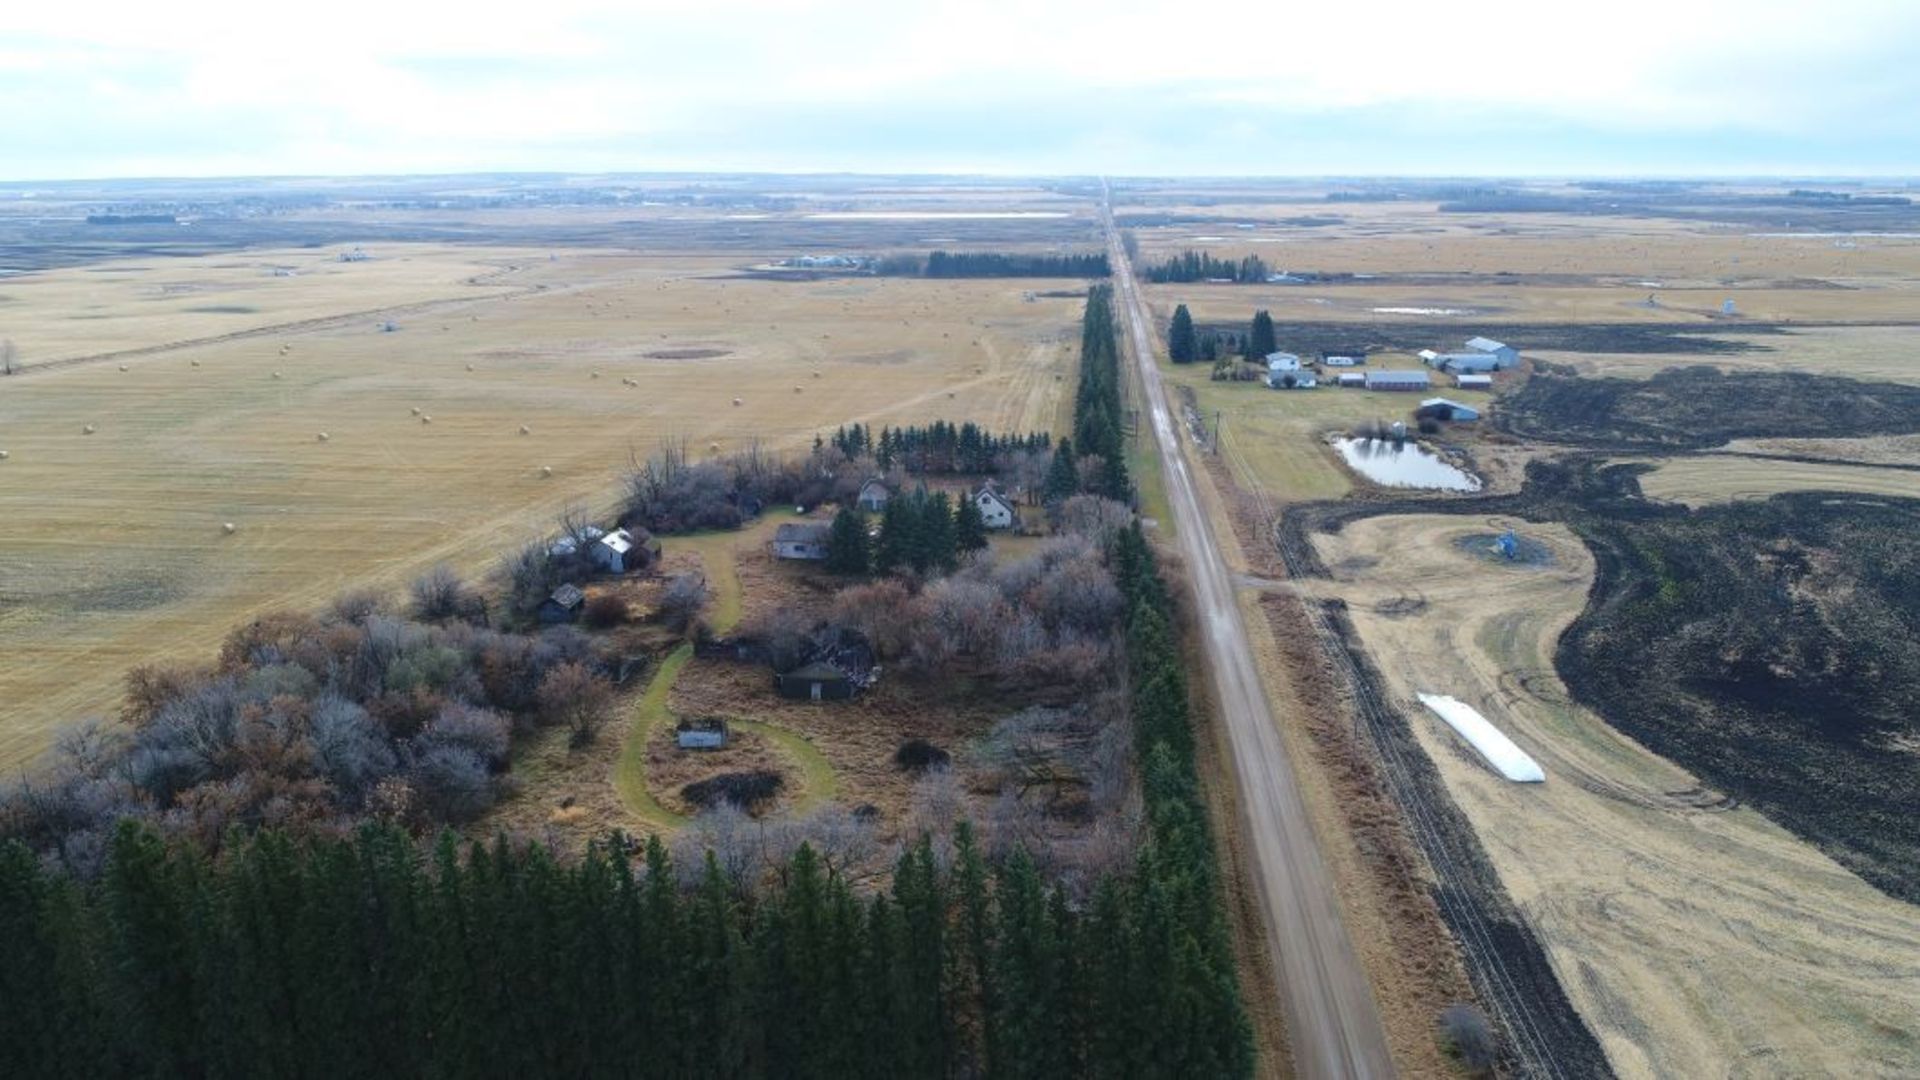 160+/- Total Acres NW 8-56-20-W4, Bruderheim, AB, consisting of Crop Land, Surface Lease & Yard Site - Image 4 of 34